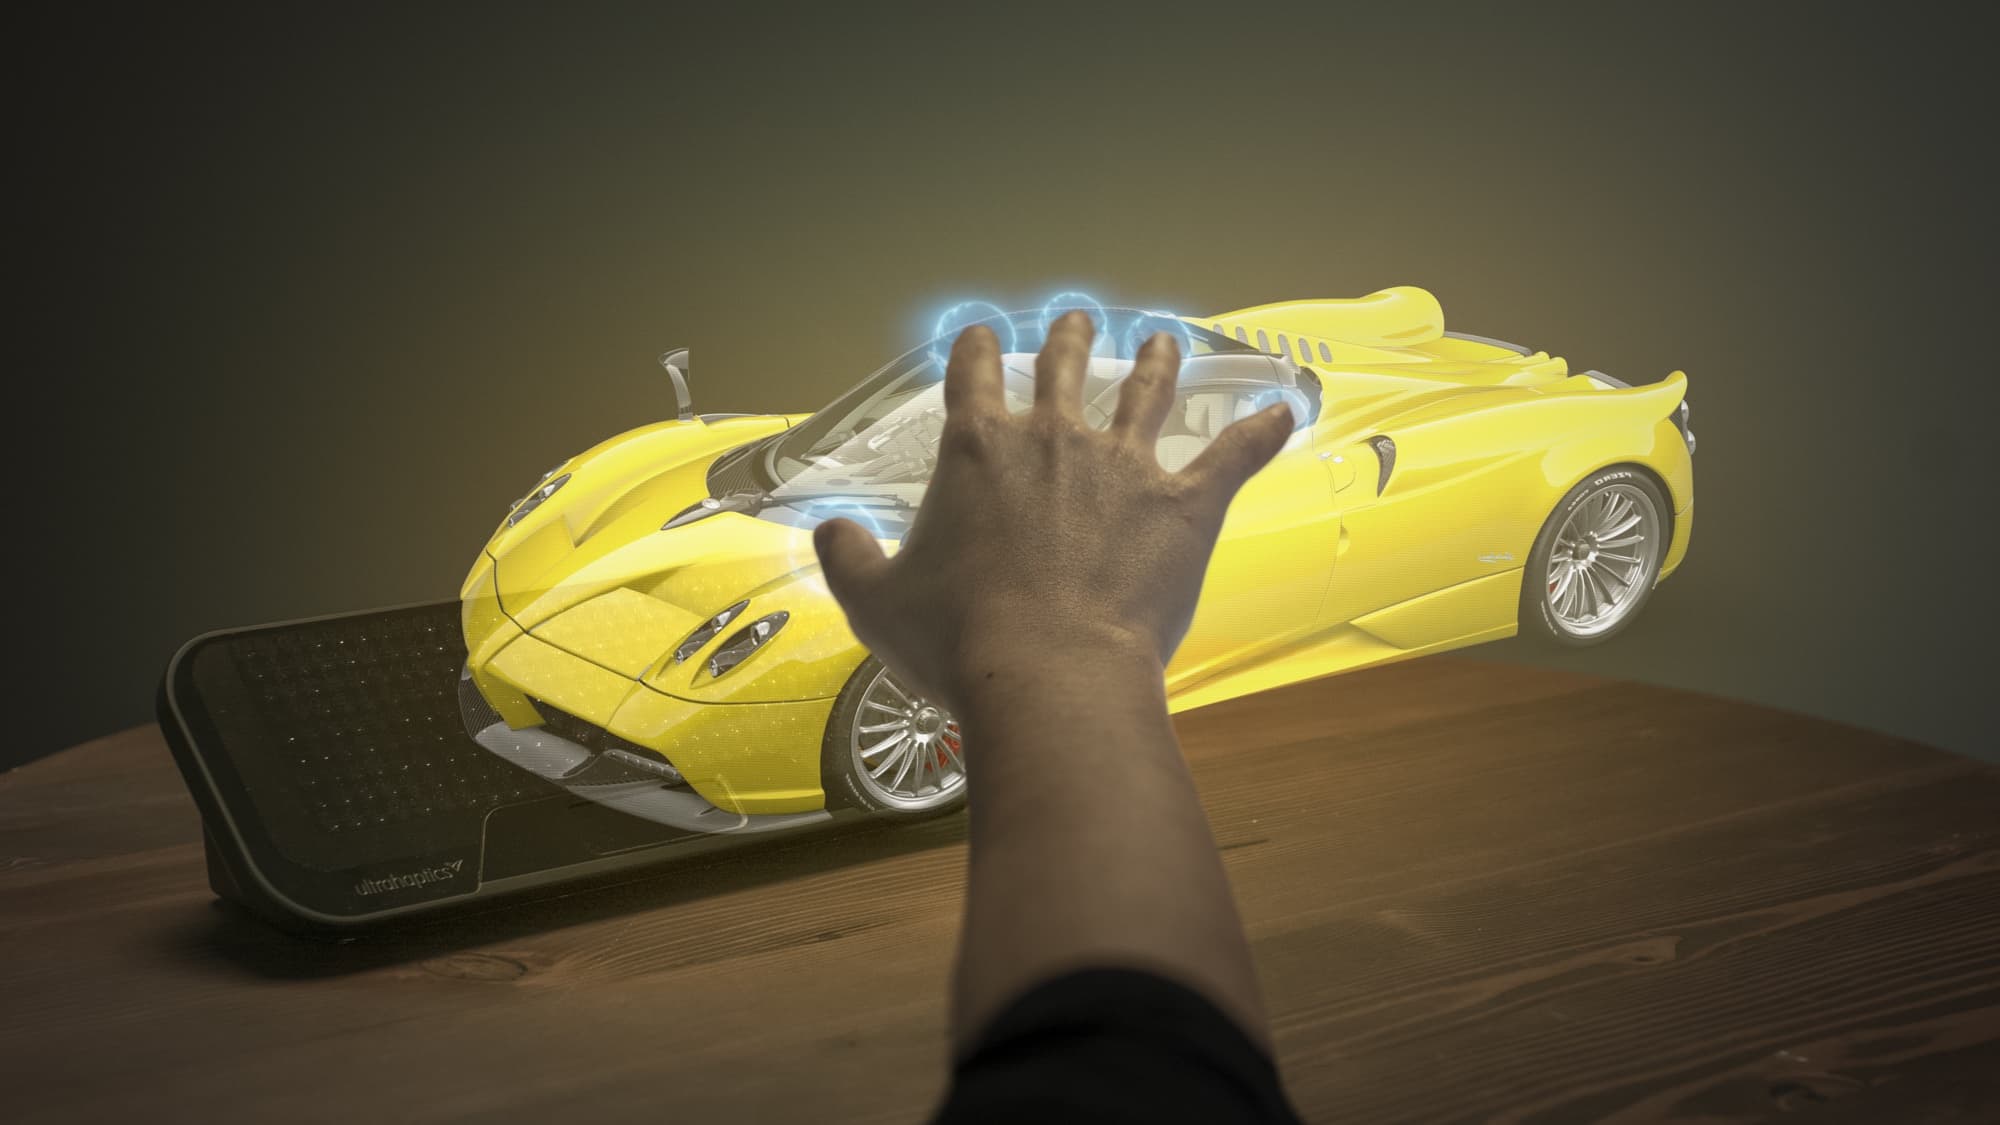 CES – Ultrahaptics Uses Ultrasound for Touchless Gesture Control, Haptic Feedback, and 3D Viewing